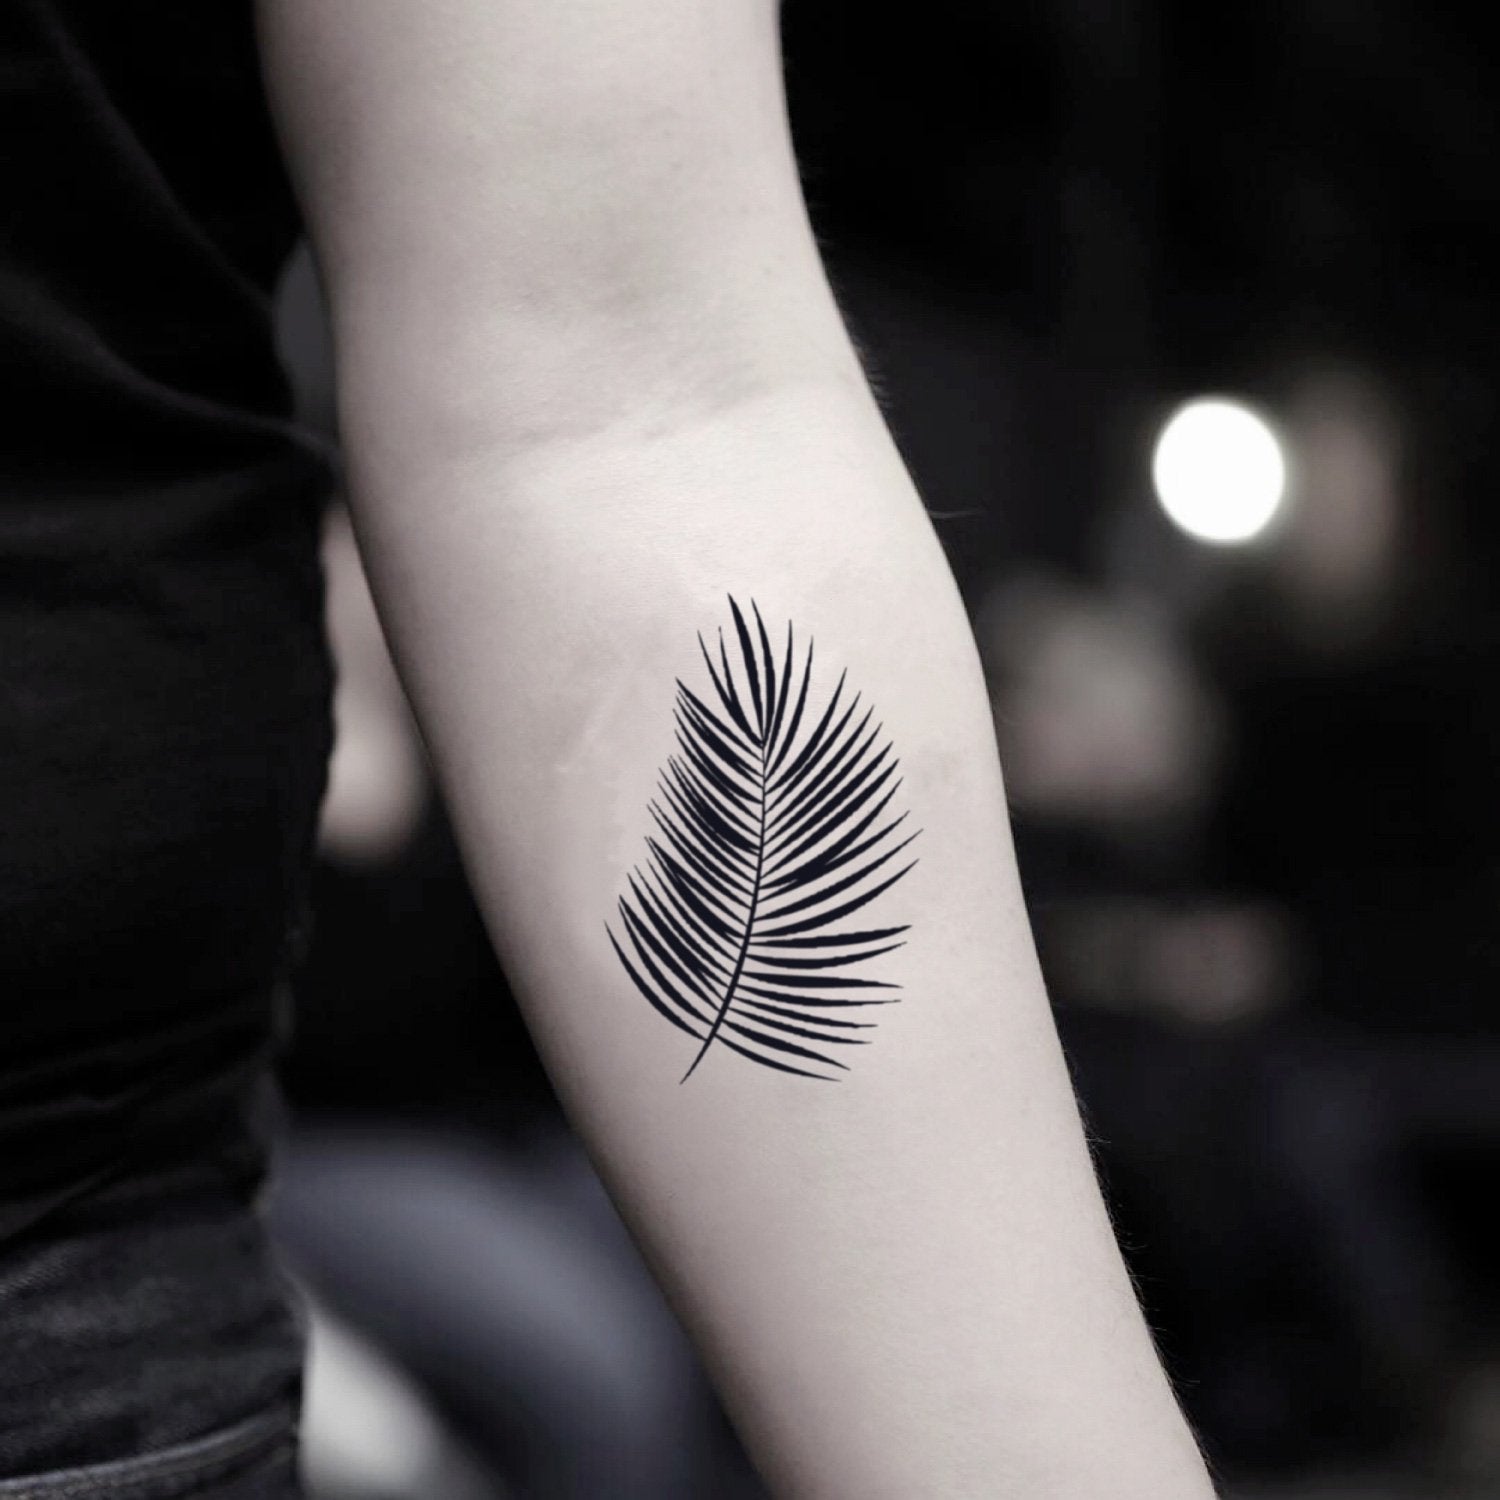 She Presses A Leaf Against Her Arm. What It Becomes? BEAUTIFUL! |  LittleThings.com